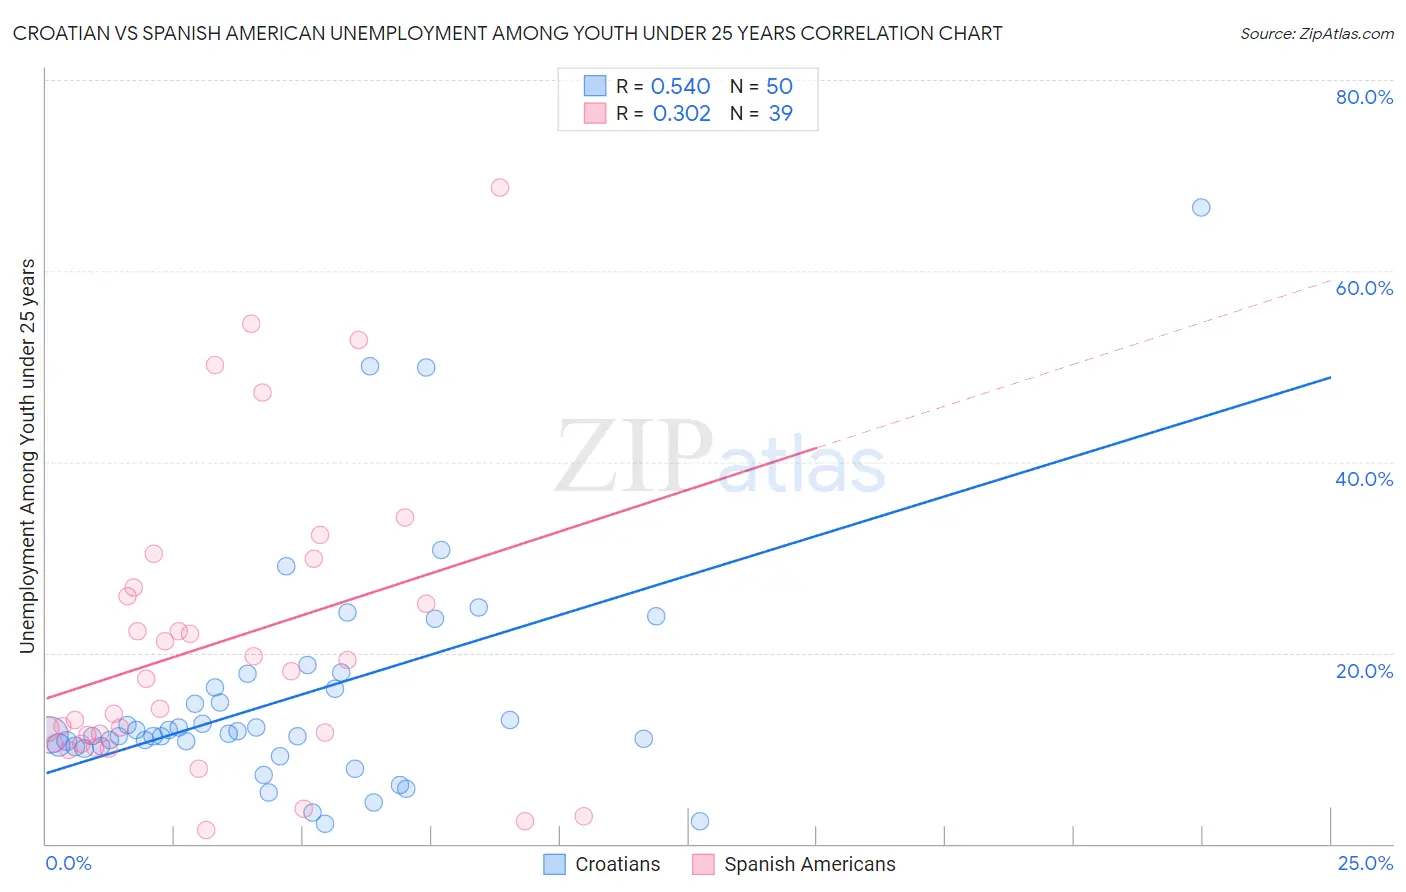 Croatian vs Spanish American Unemployment Among Youth under 25 years